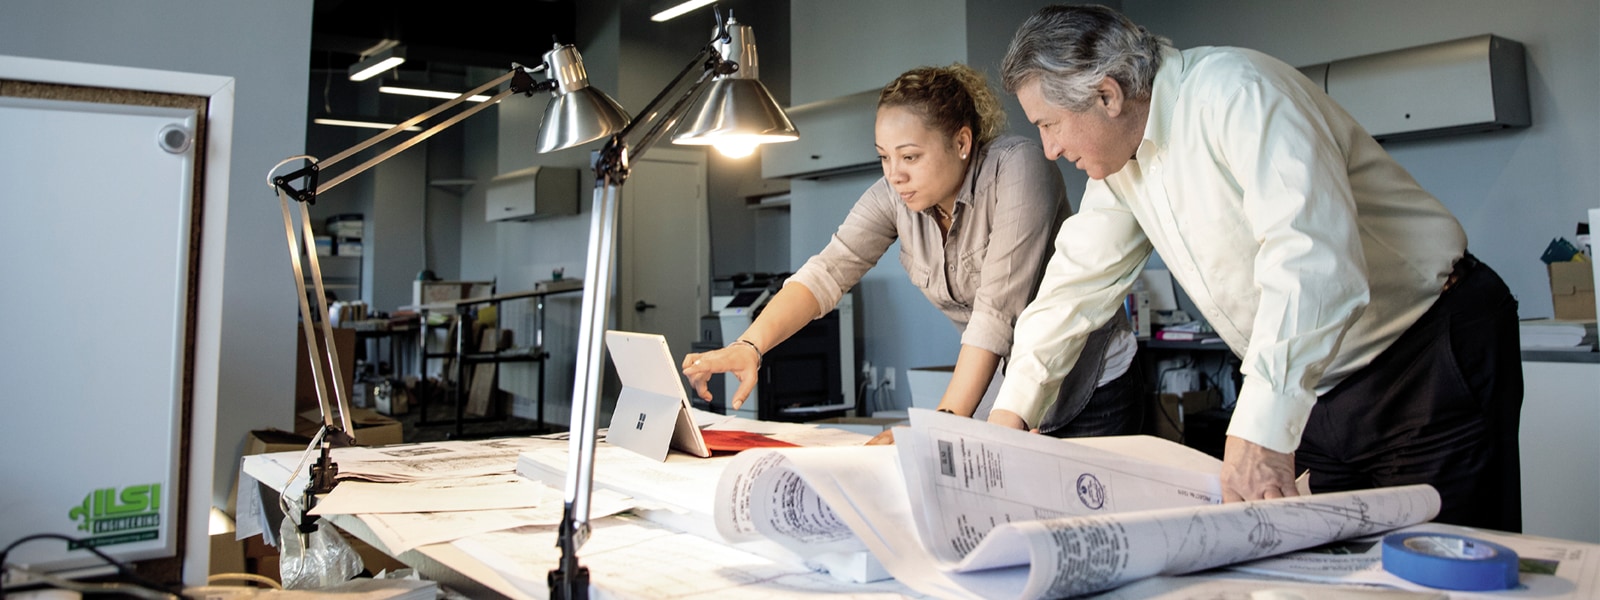 Two business professionals viewing architectural drawings on drafting table.